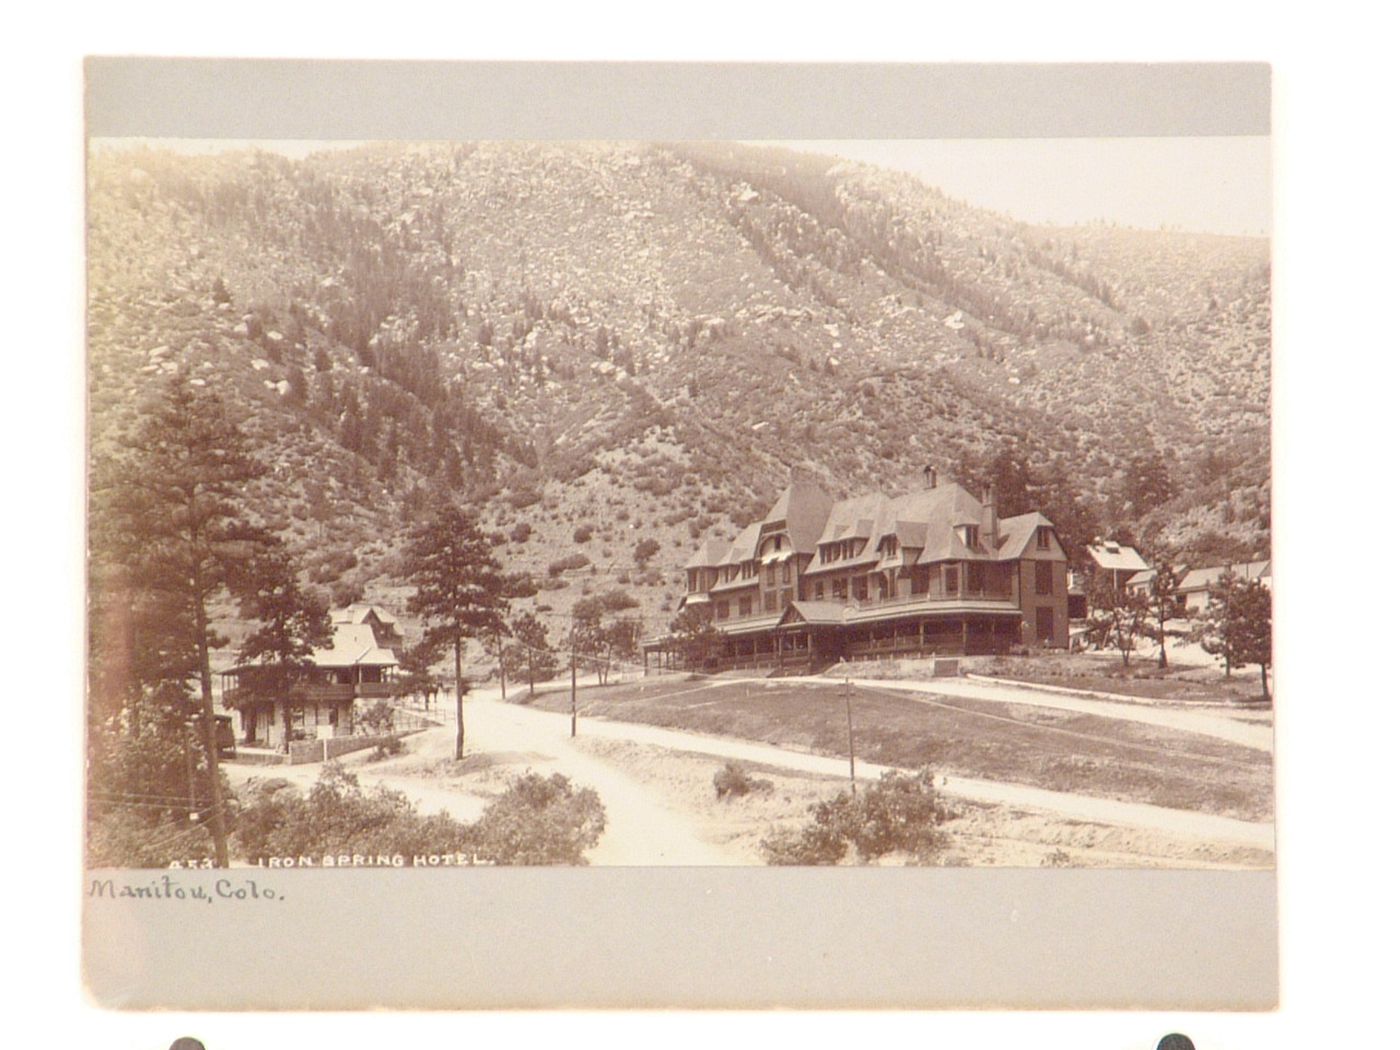 View of the Iron Springs Hotel with mountains in the background, Manitou Springs, Colorado, United States